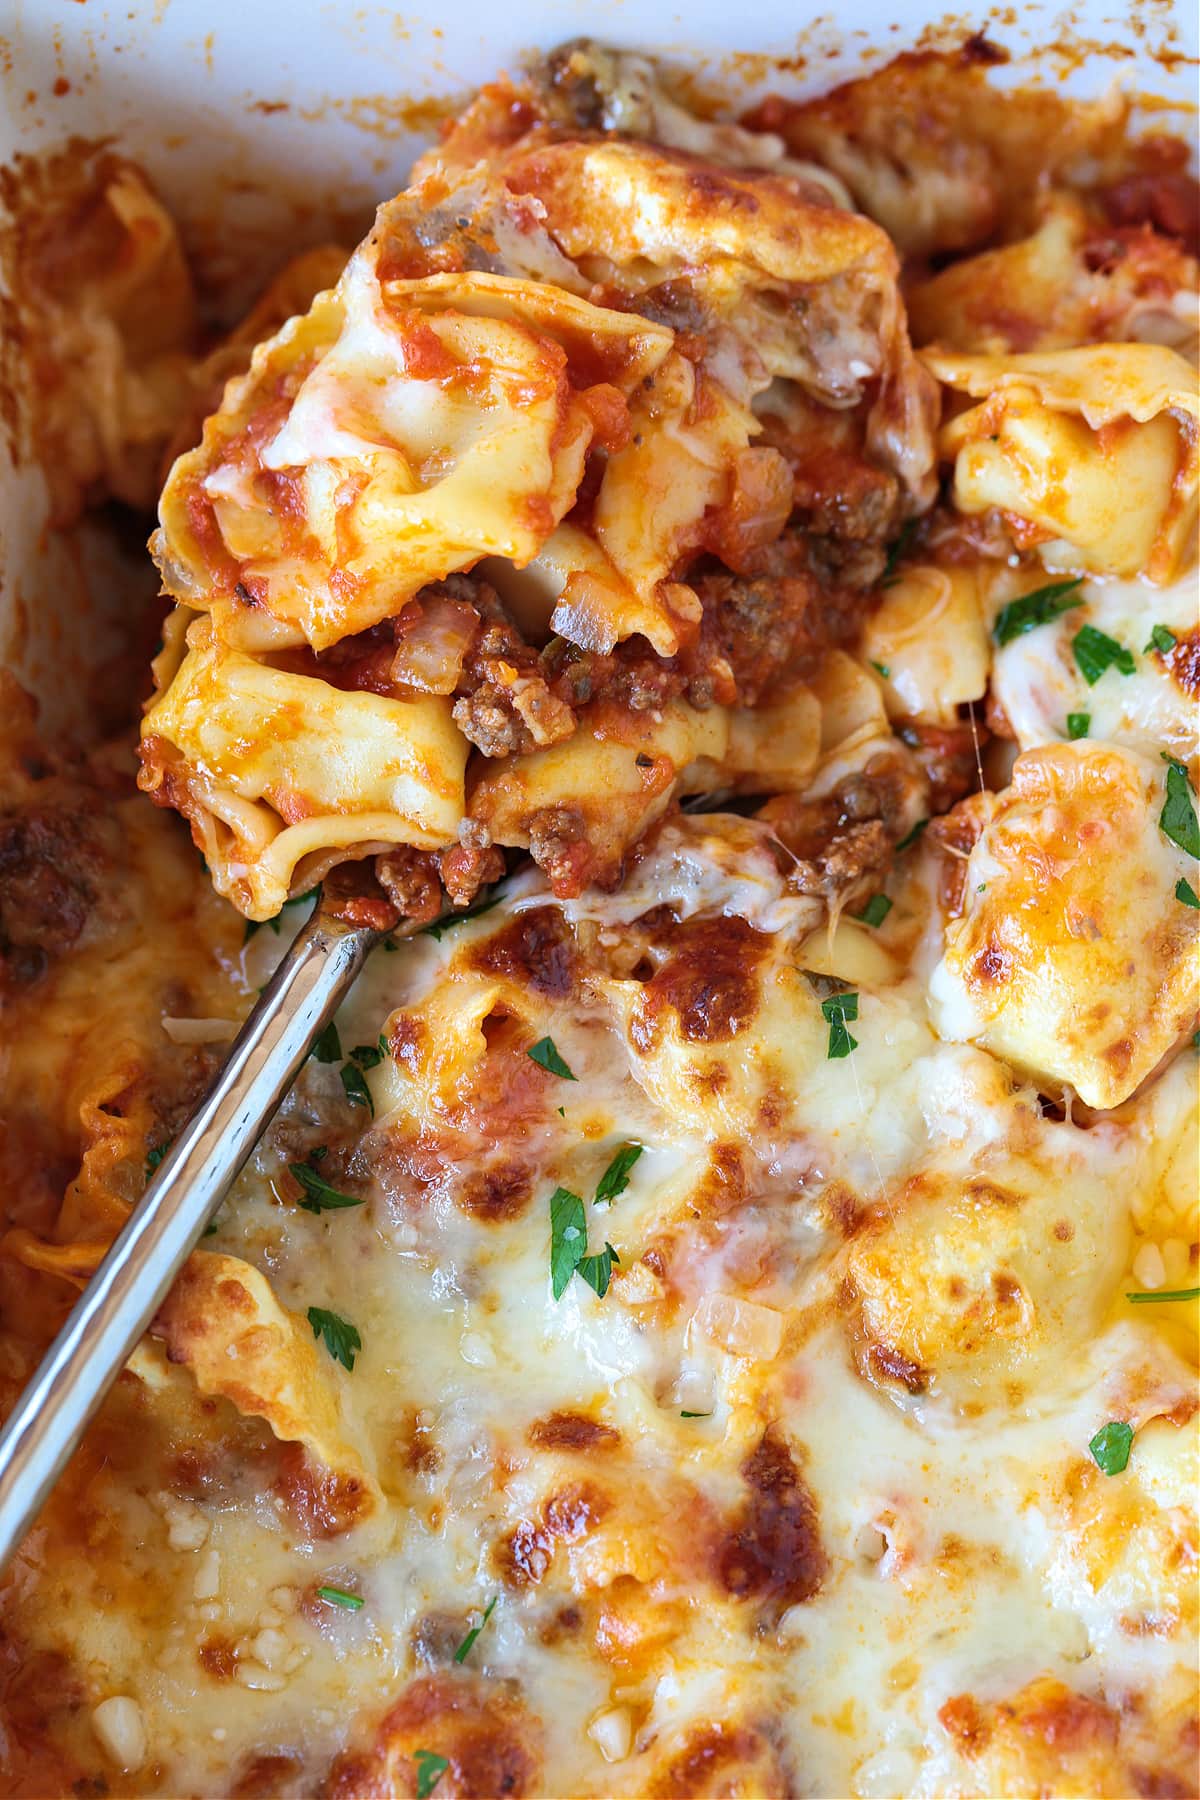 spoon dipped into a casserole with tortellini, ground beef and cheese